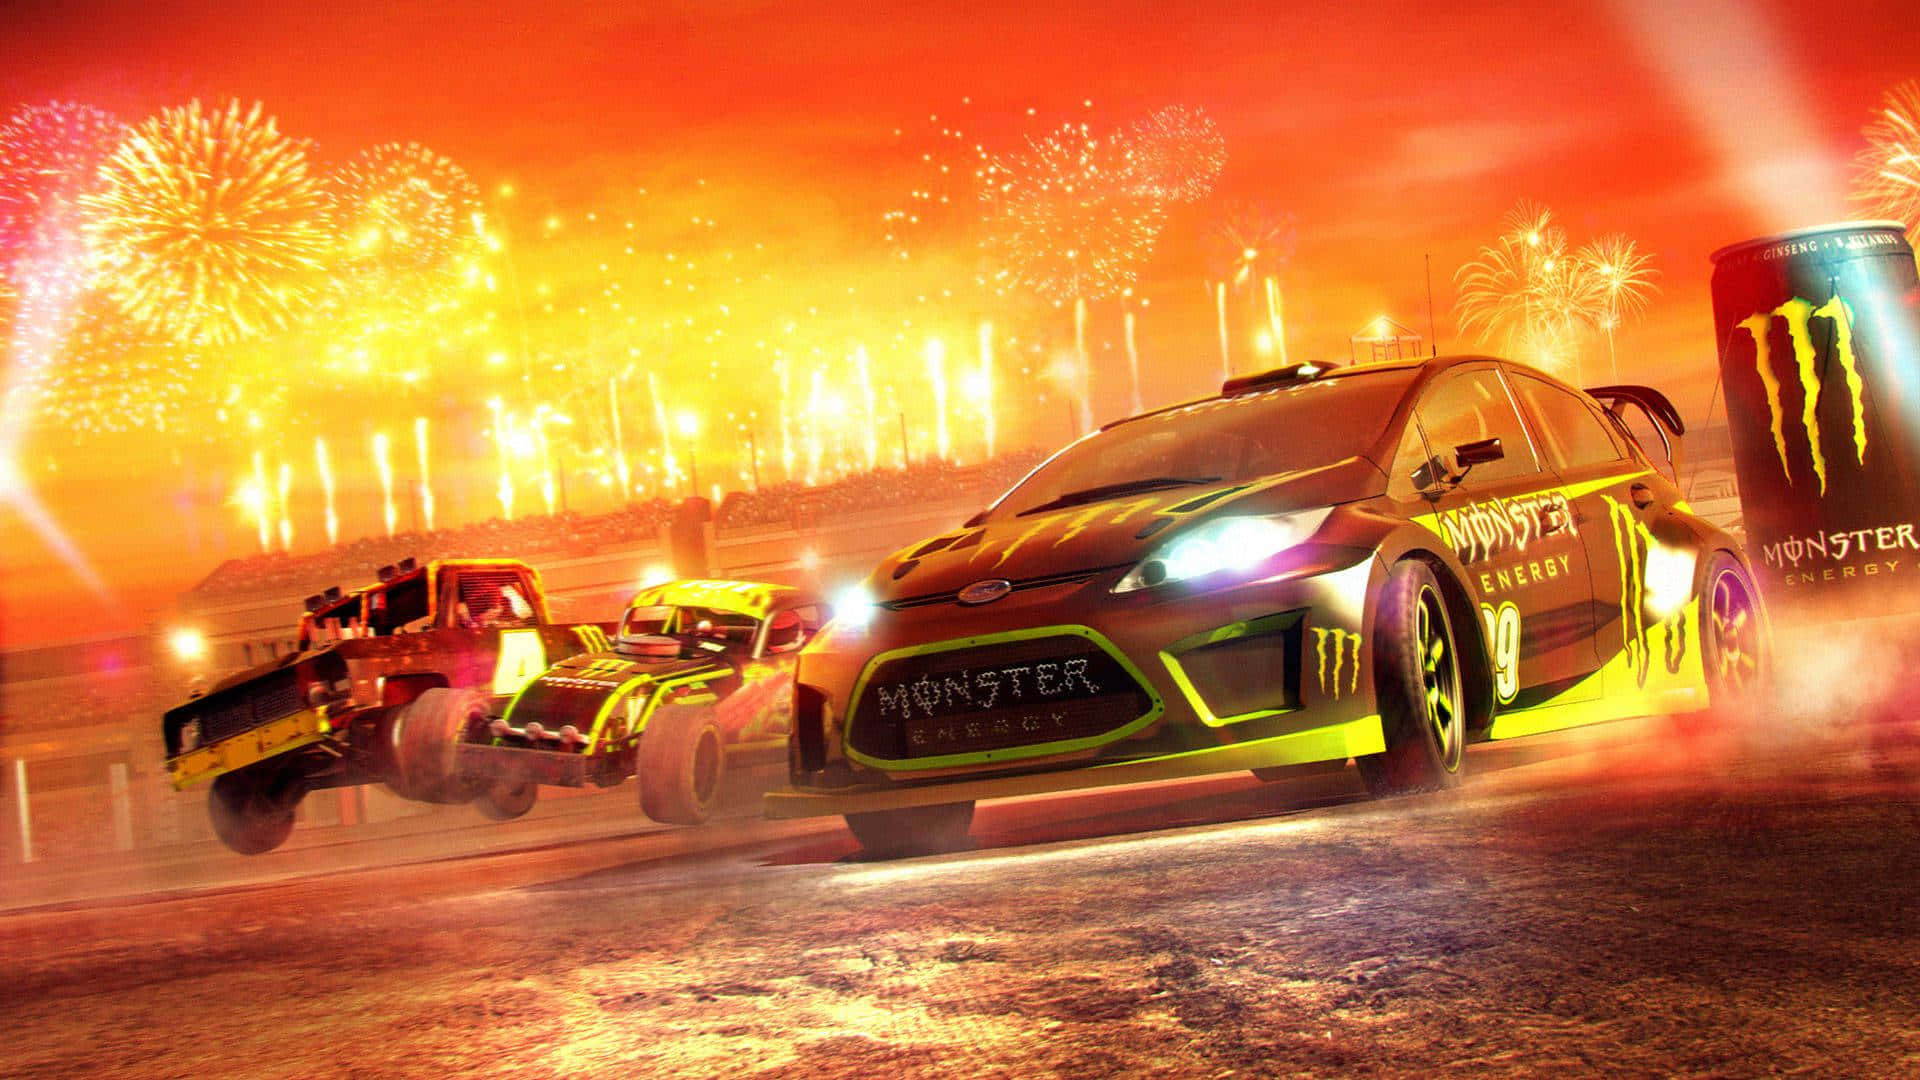 Fuel your competitive spirit with HD Dirt Showdown